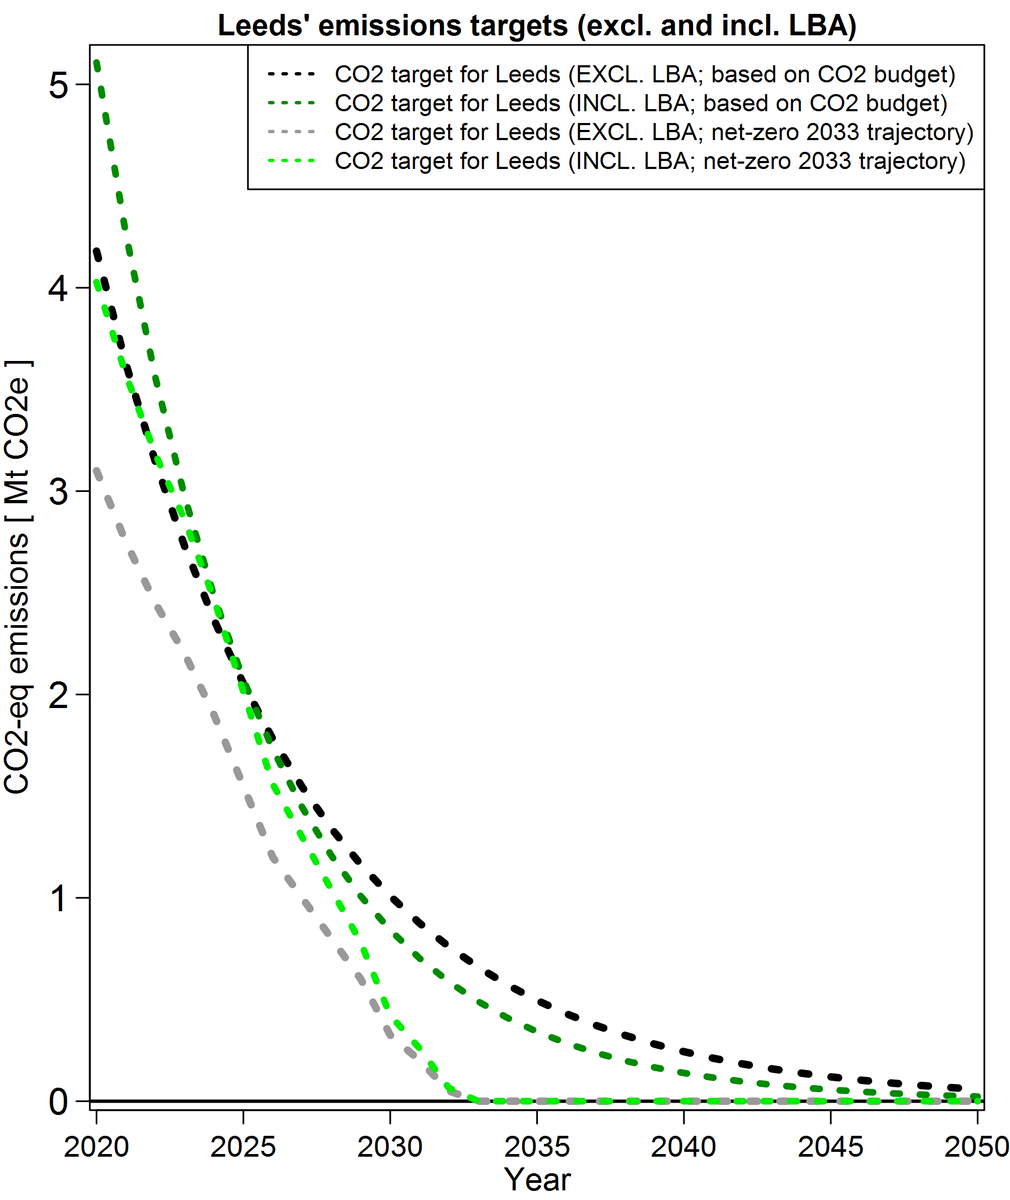 3/ Both trajectories exclude LBA emissions (~18% of Leeds emissions). I adjusted them to account for LBA emissions. Dark green dotted curve = budget-based CO2 target for Leeds incl. LBA; light green dotted curve = net-zero 2033 trajectory scaled by current share of LBA emissions.